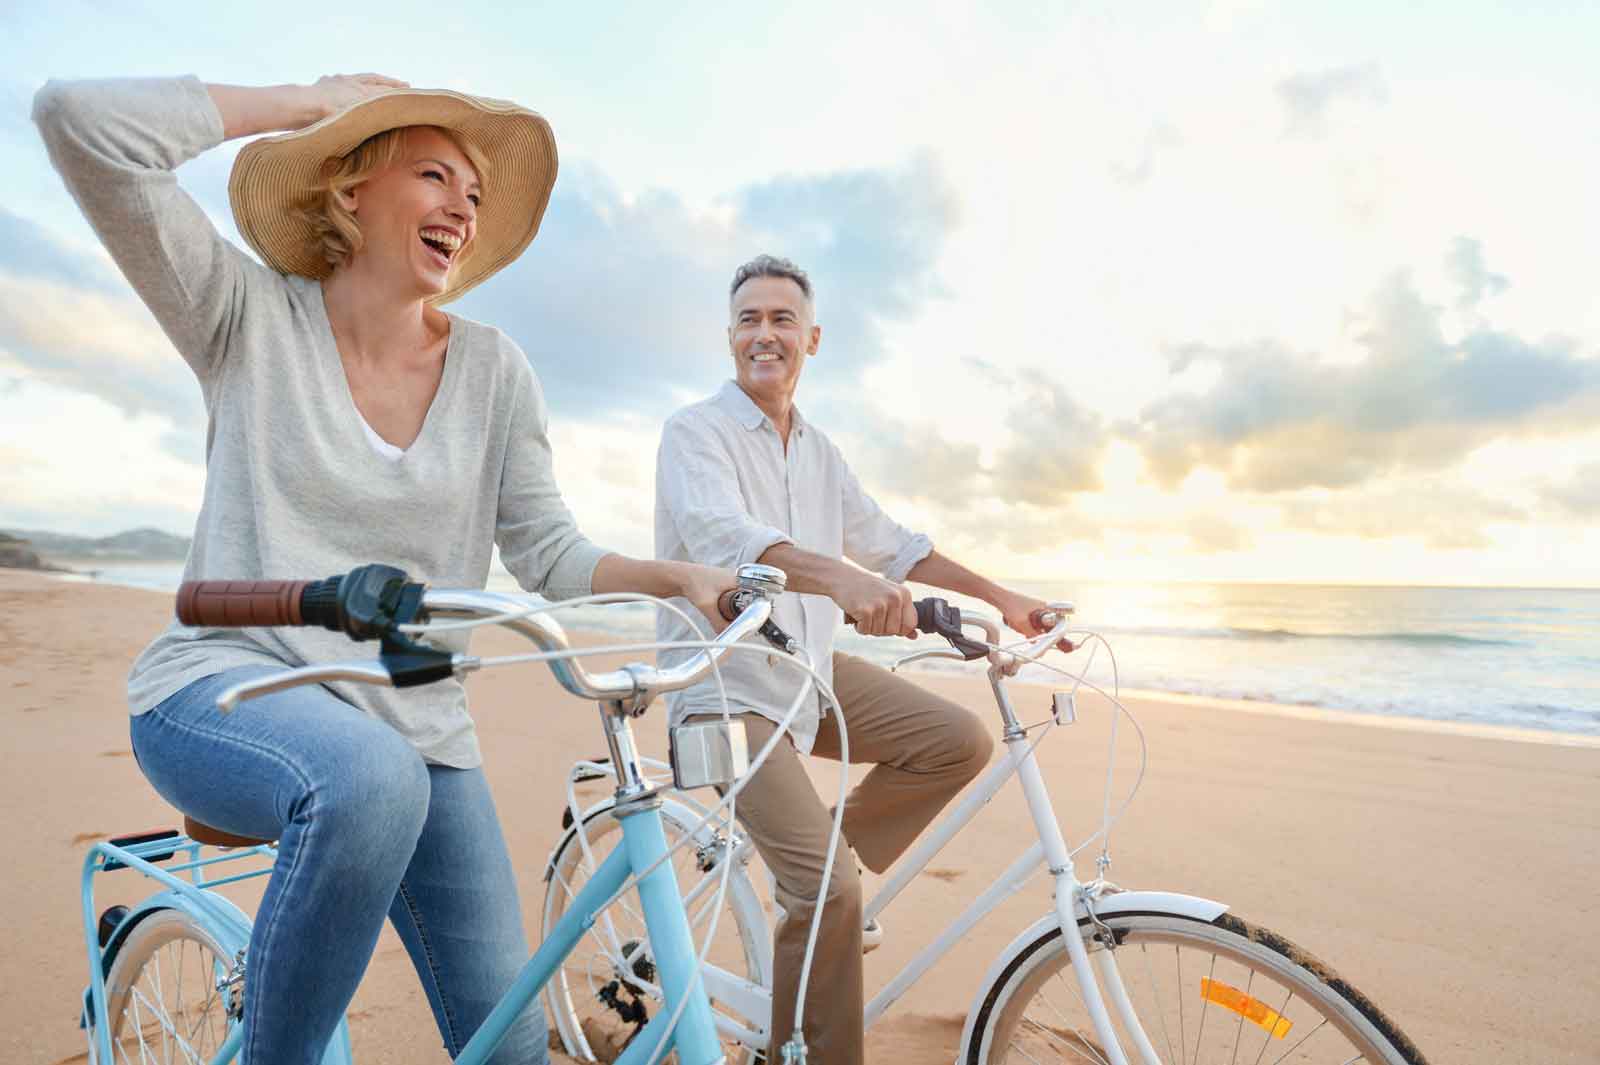 Mature couple cycling on the beach at sunset or sunrise. They are laughing and having fun. They are casually dressed. Could be a retirement vacation.